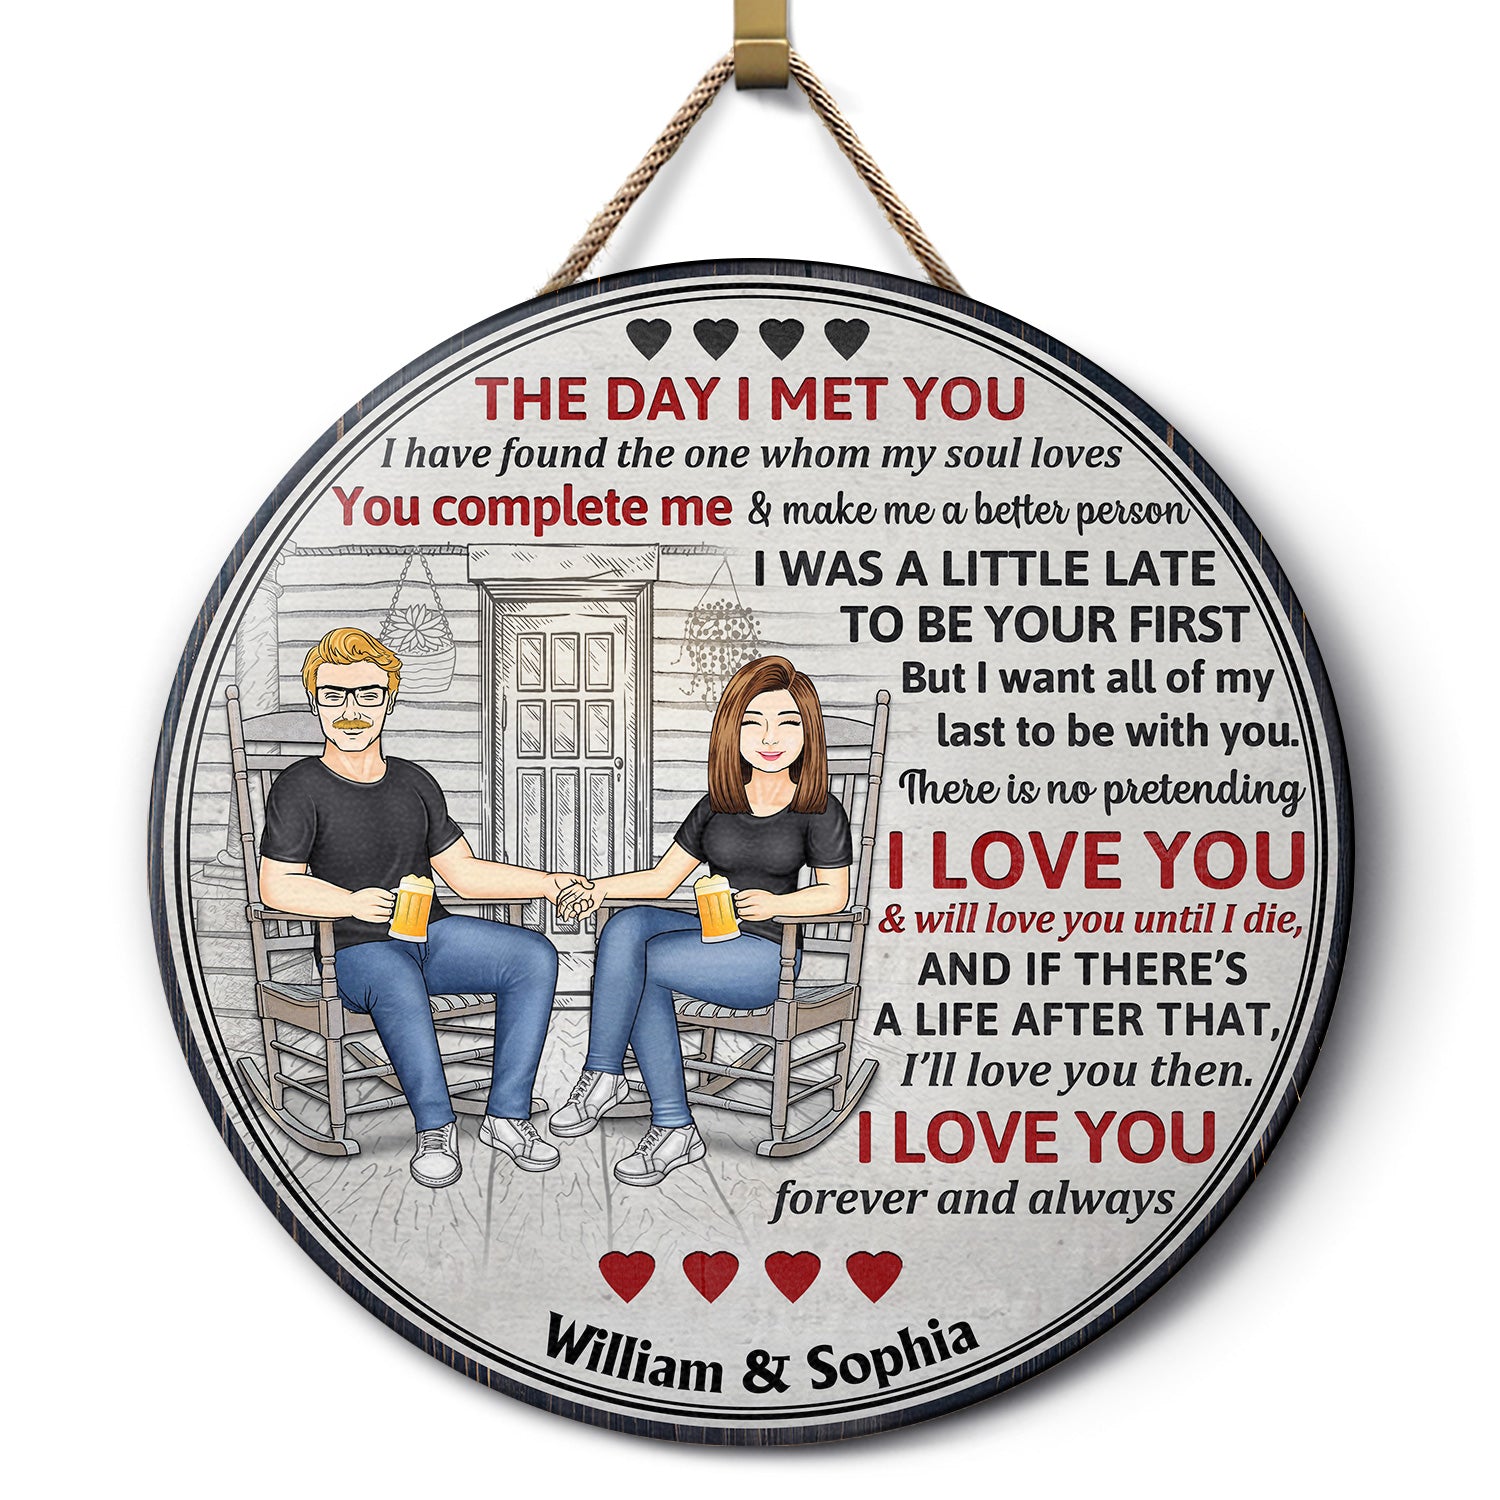 The Day I Met You - Anniversary, Birthday, Home Decor Gift For Spouse, Lover, Husband, Wife, Boyfriend, Girlfriend, Couple - Personalized Custom Wood Circle Sign